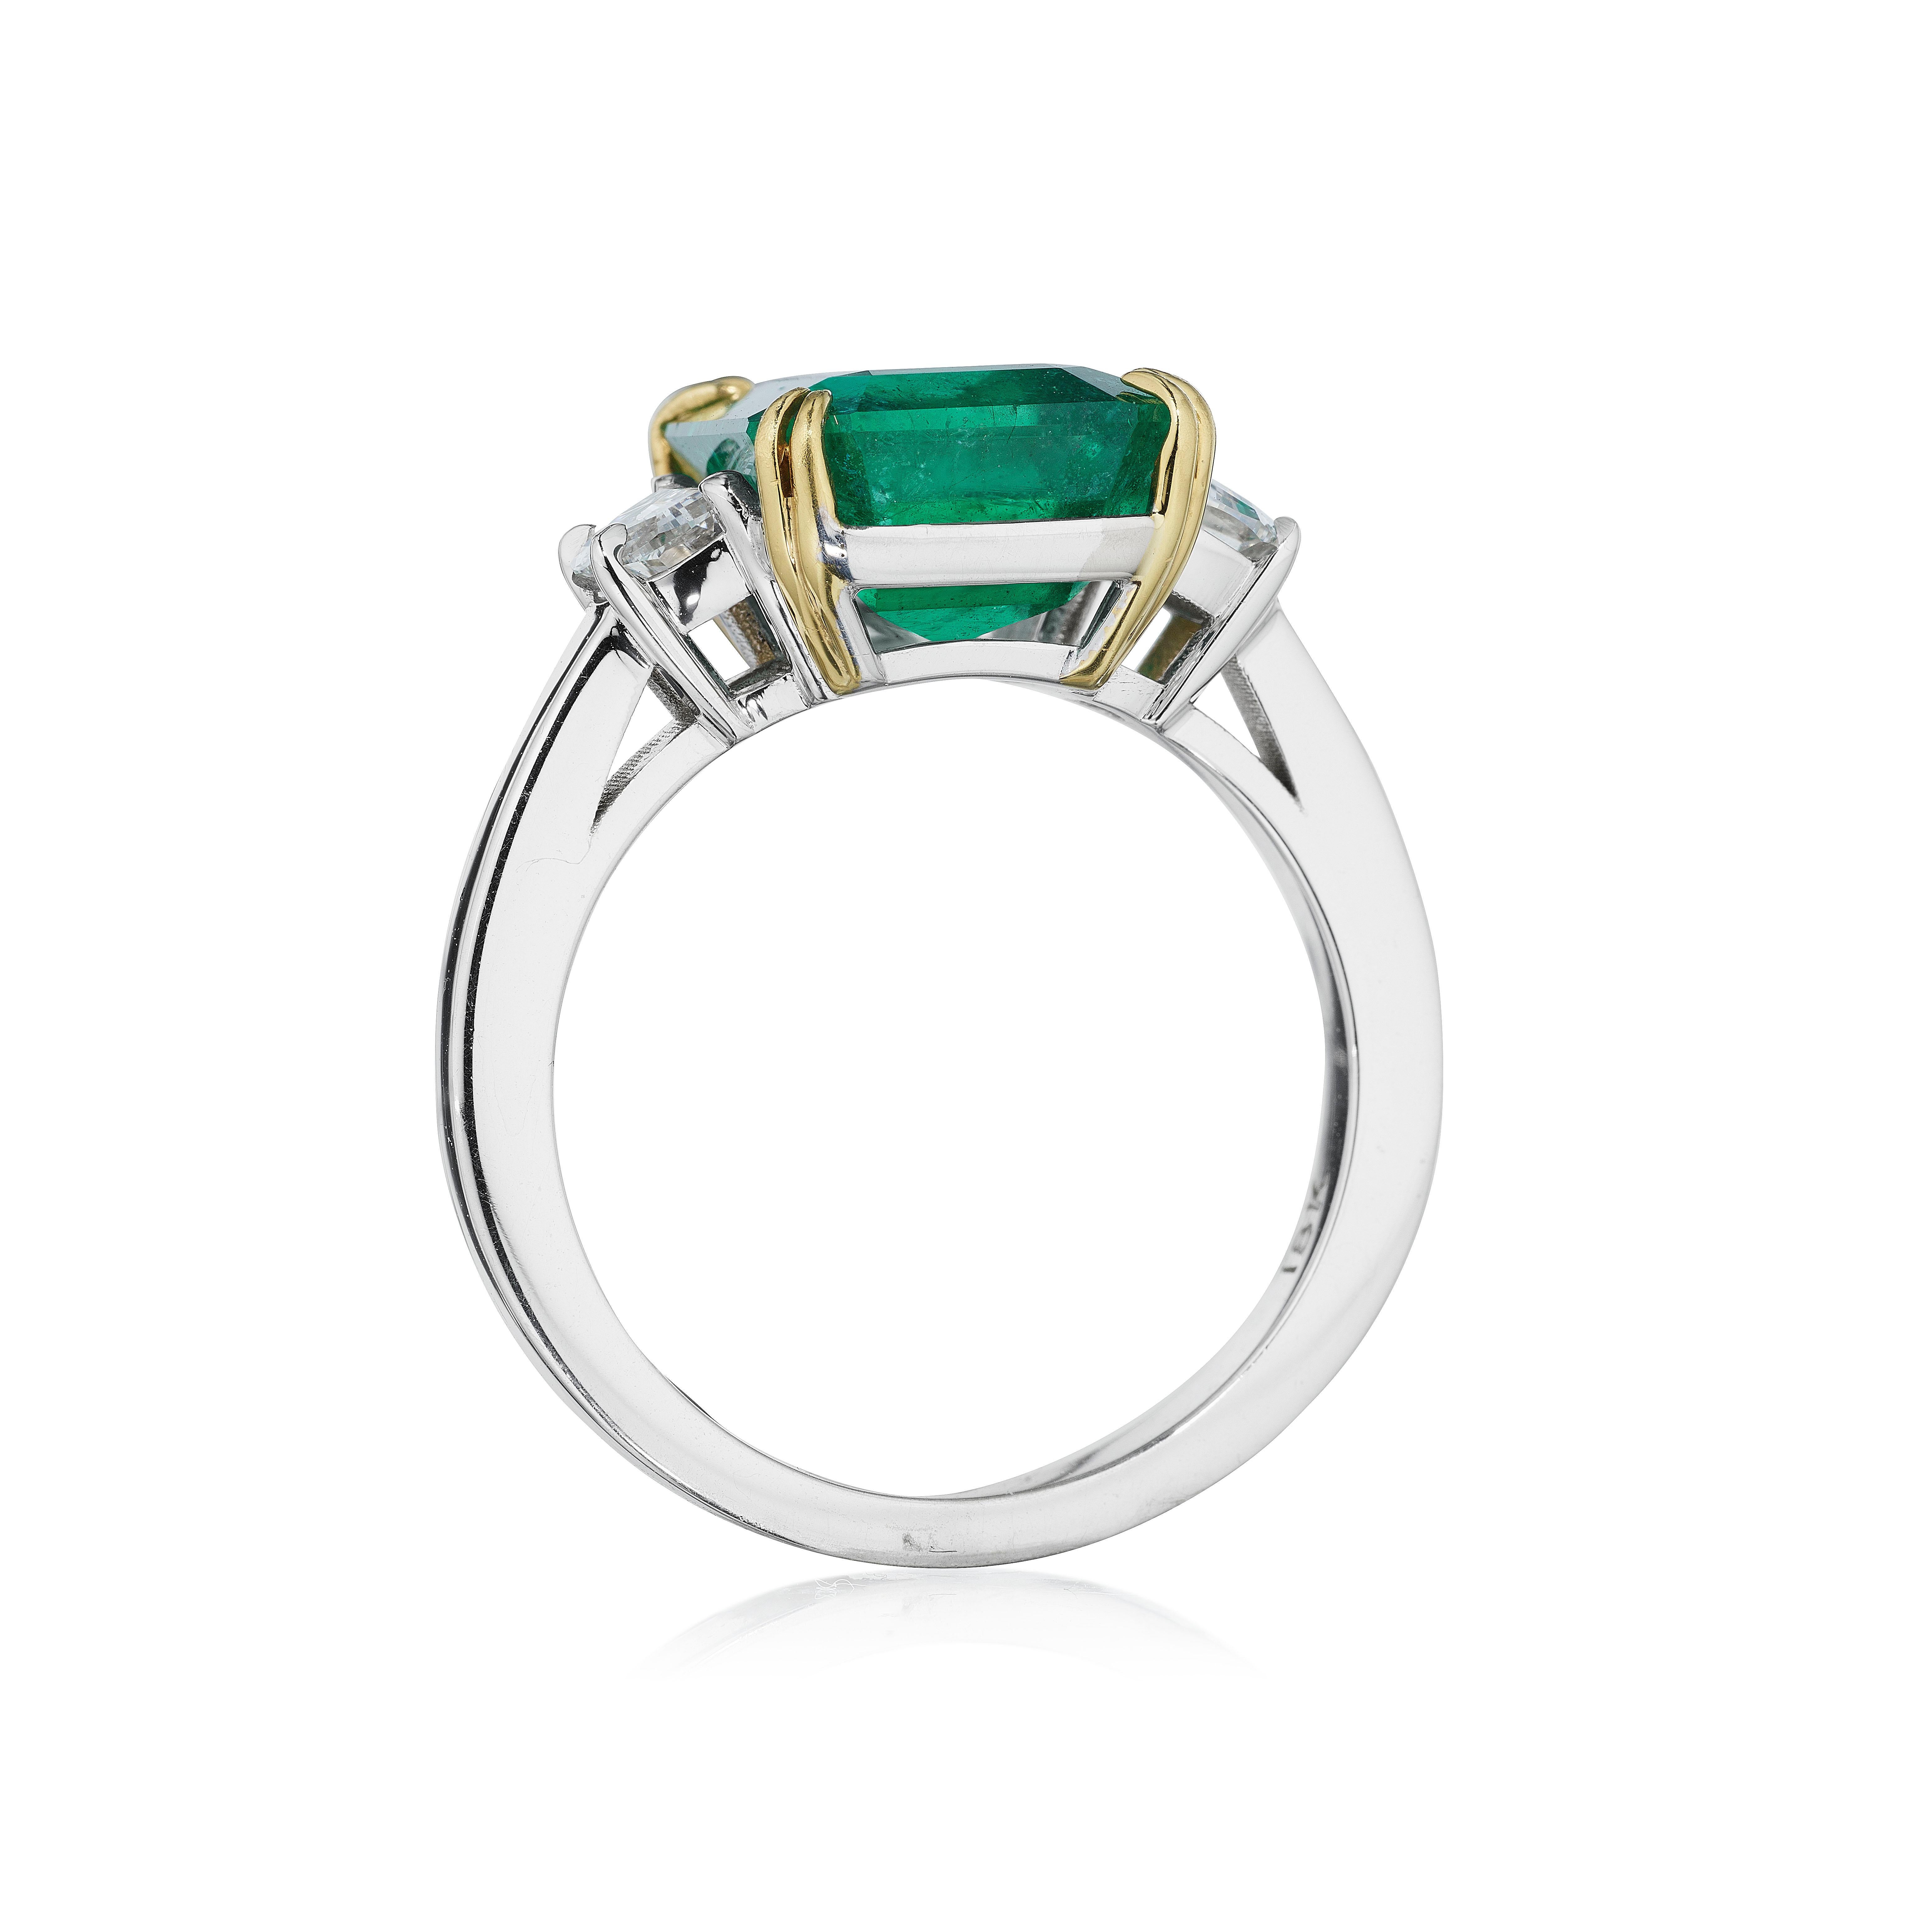 •	18KT Two Tone
•	Size 6.5
•	5.48 Carats

•	Number of Green Emeralds: 1
•	Carat Weight: 4.99ctw
•	Color: Natural Beryl Green
•	CDC Certified: CDC 1909296

•	Number of Half Moon Diamonds: 2
•	Carat Weight 0.49ctw

•	This beautiful 3 stone ring